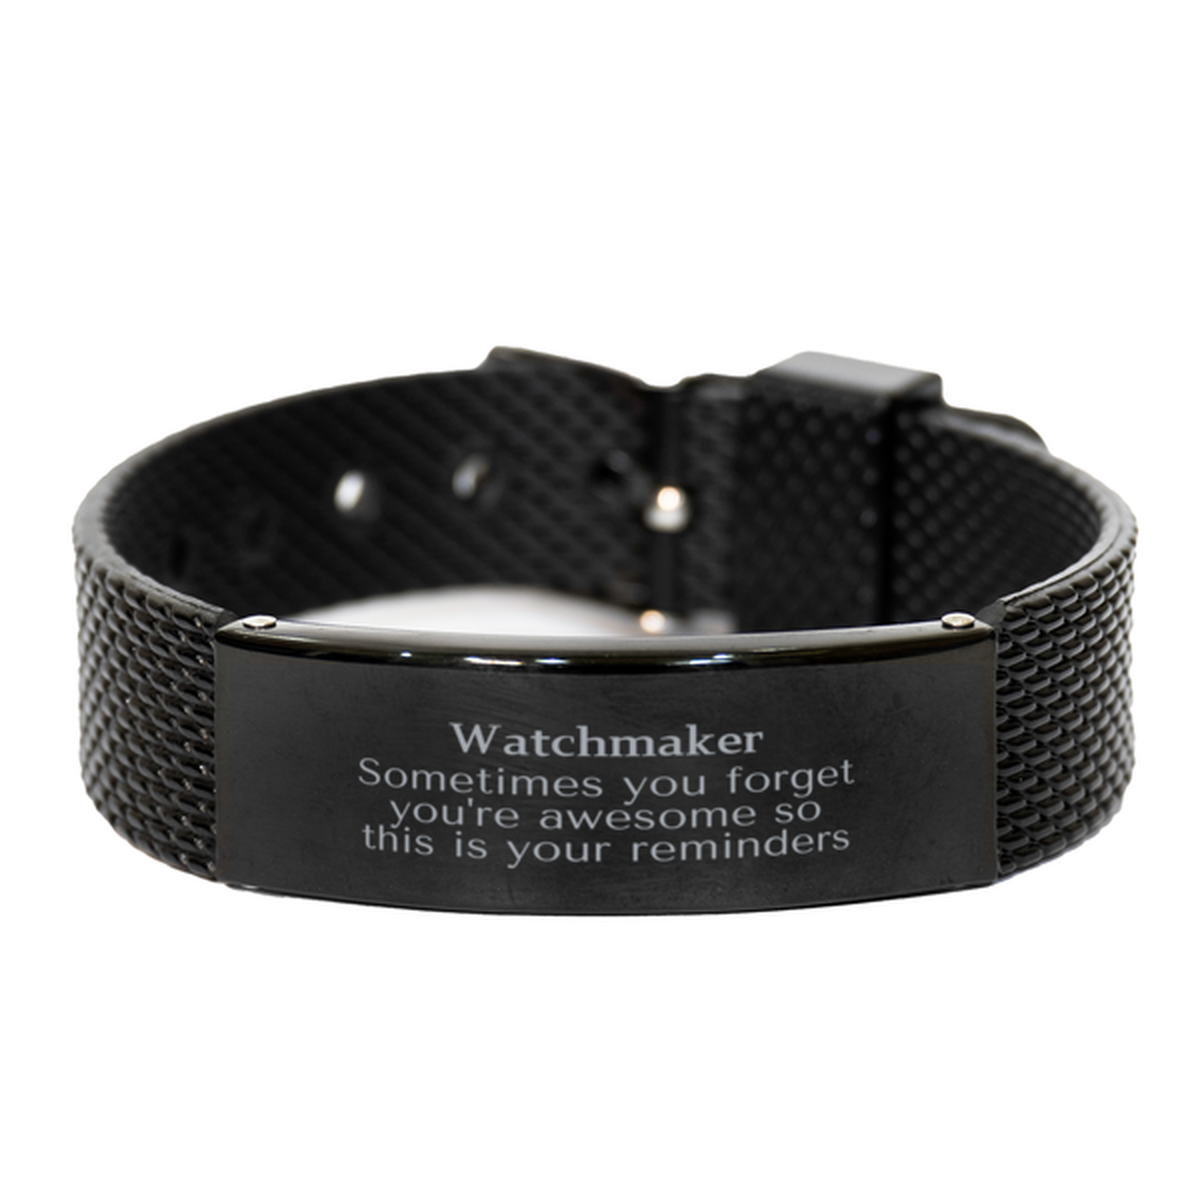 Sentimental Watchmaker Black Shark Mesh Bracelet, Watchmaker Sometimes you forget you're awesome so this is your reminders, Graduation Christmas Birthday Gifts for Watchmaker, Men, Women, Coworkers